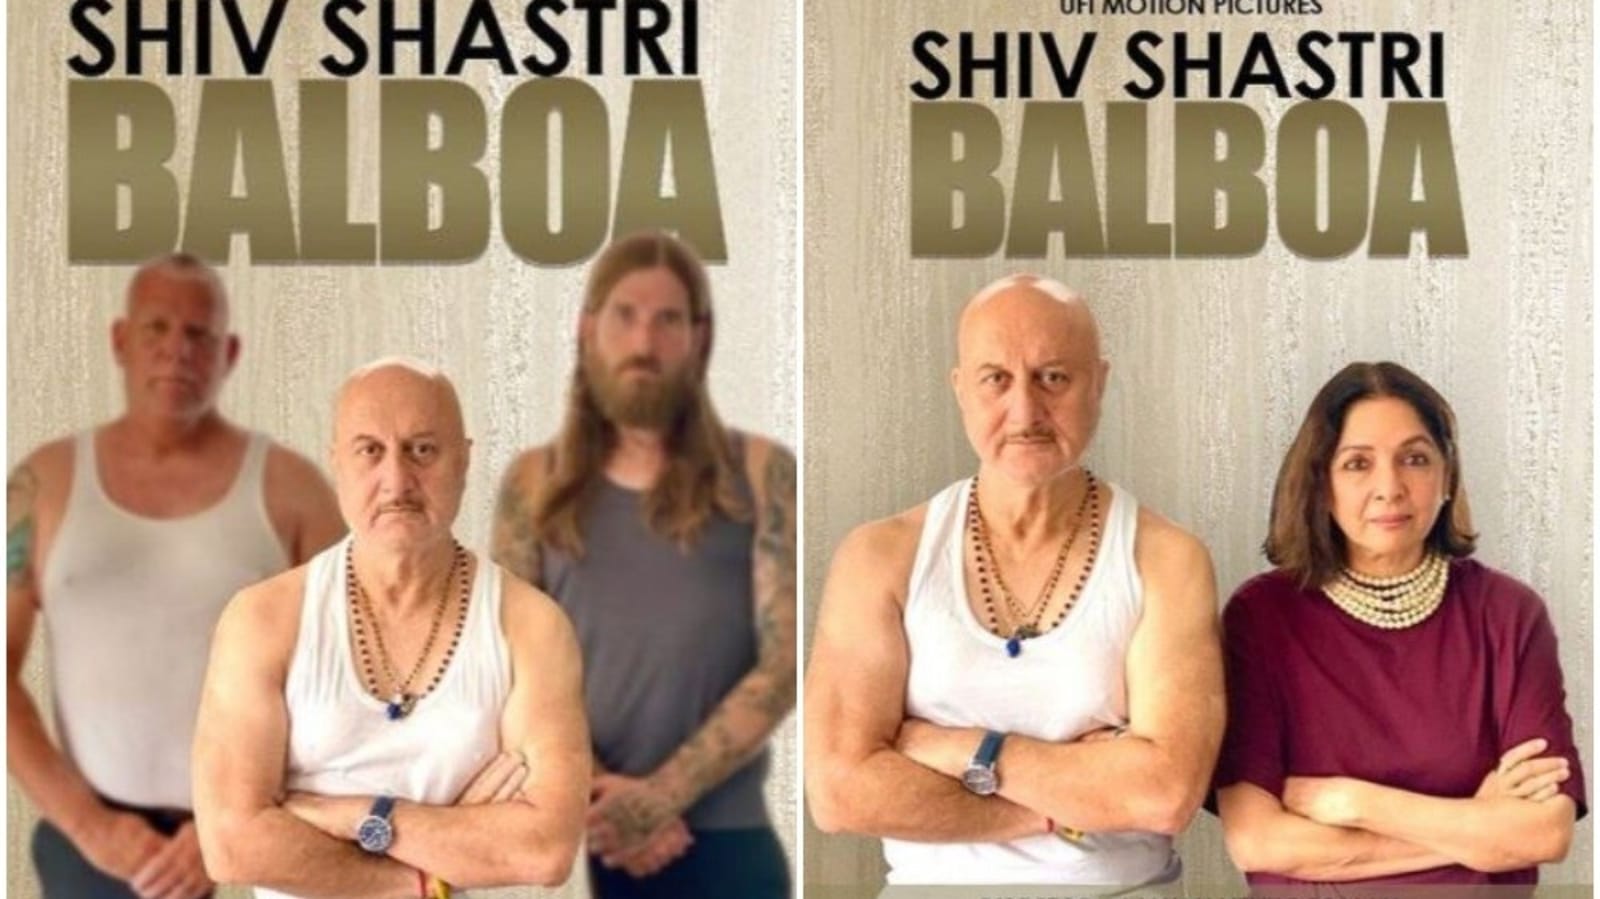 Anupam Kher reveals details of his 519th film Shiv Shastri Balboa, will  also star Neena Gupta. See posters | Bollywood - Hindustan Times